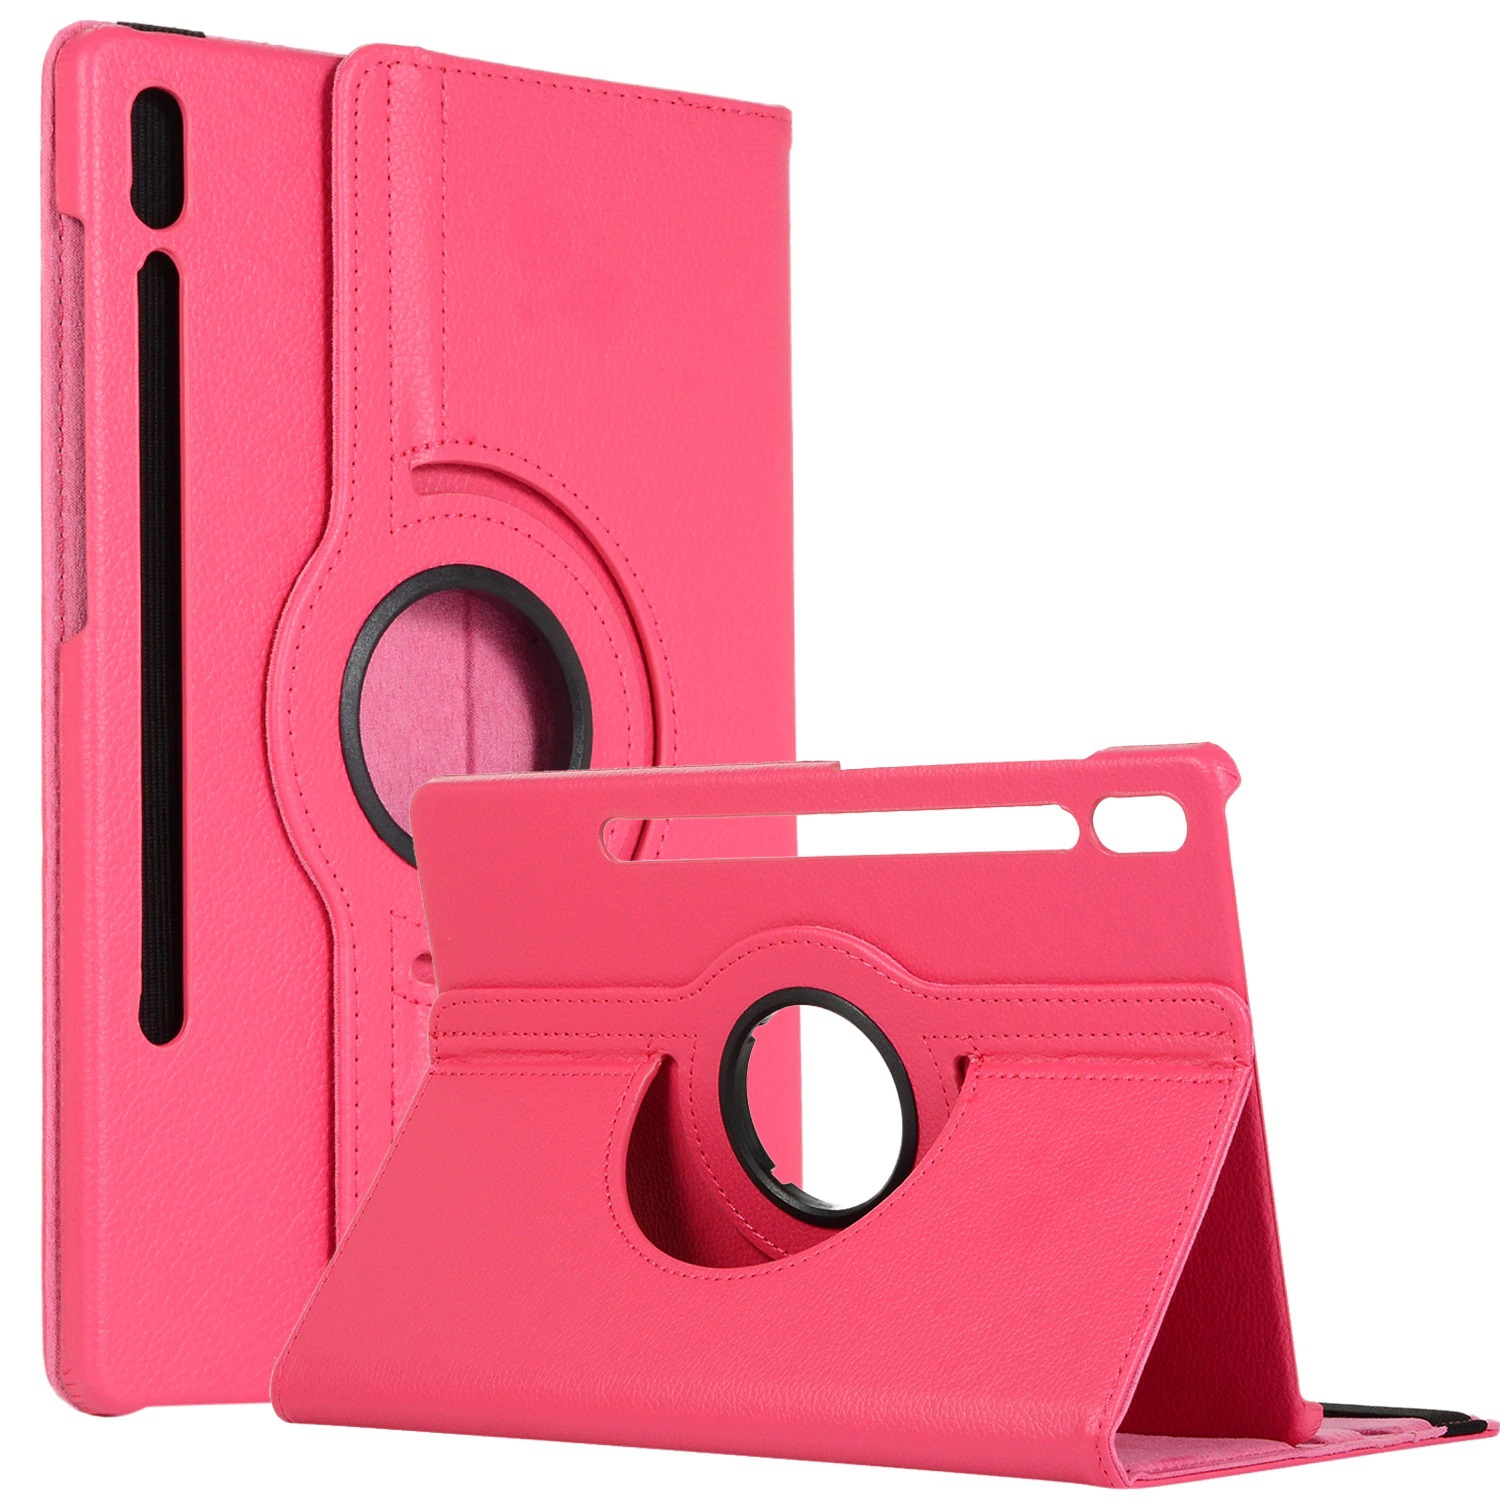 【CSmart】 Rotating PU Leather Stand Case Smart Cover for Samsung Galaxy Tab S7 Plus / S8 Plus 2022 12.4", T970 / X800, Hot Pink